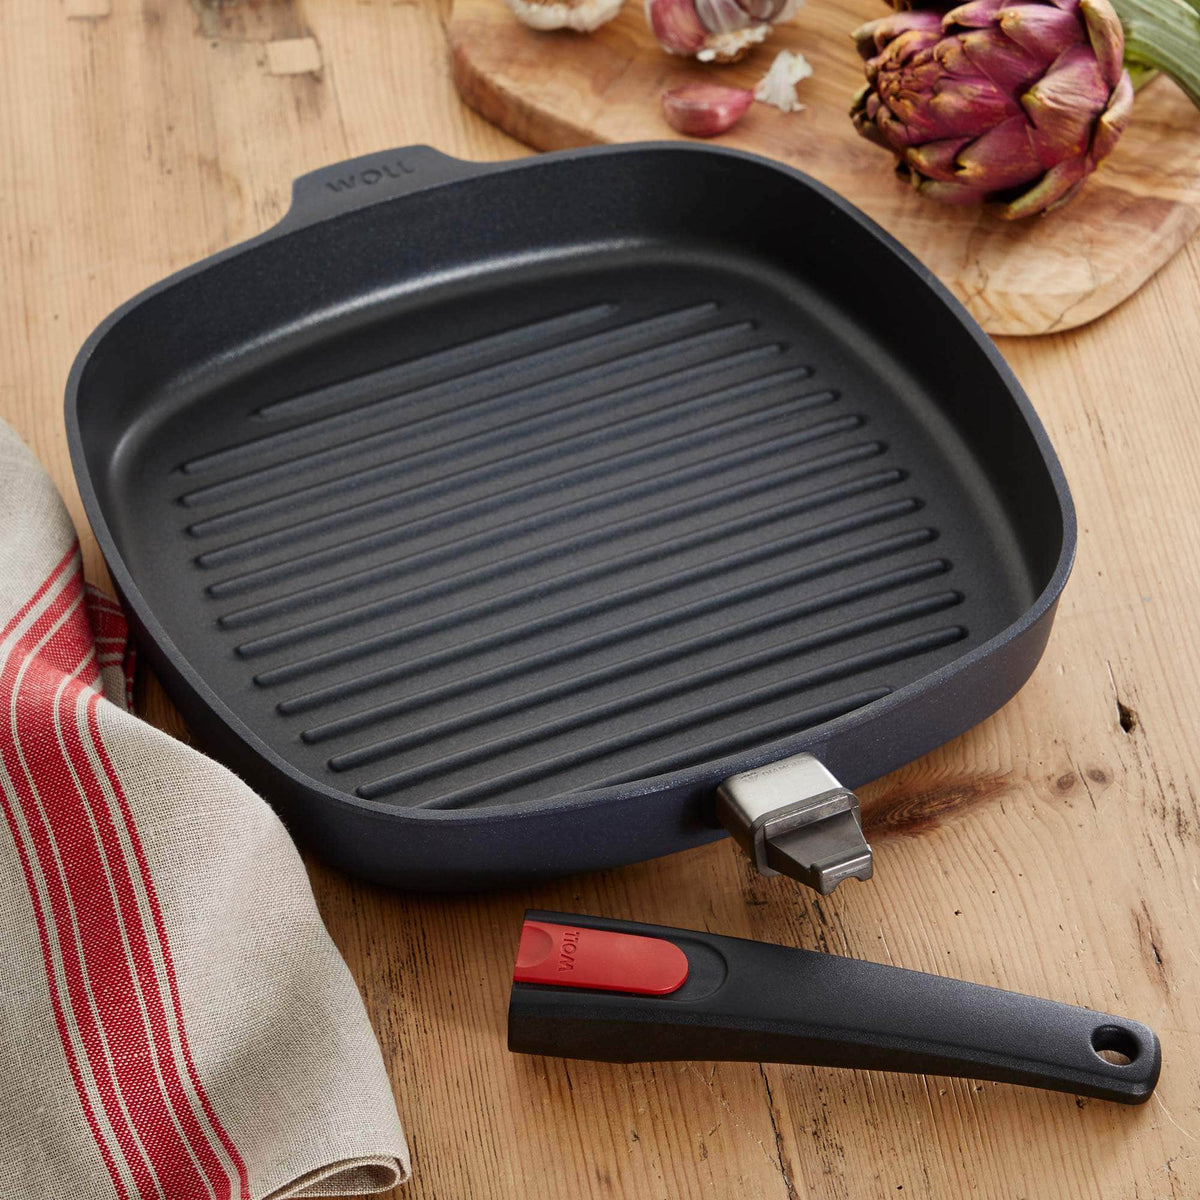 The best griddle pan for use with range cookers. Oven &amp; dishwasher safe!